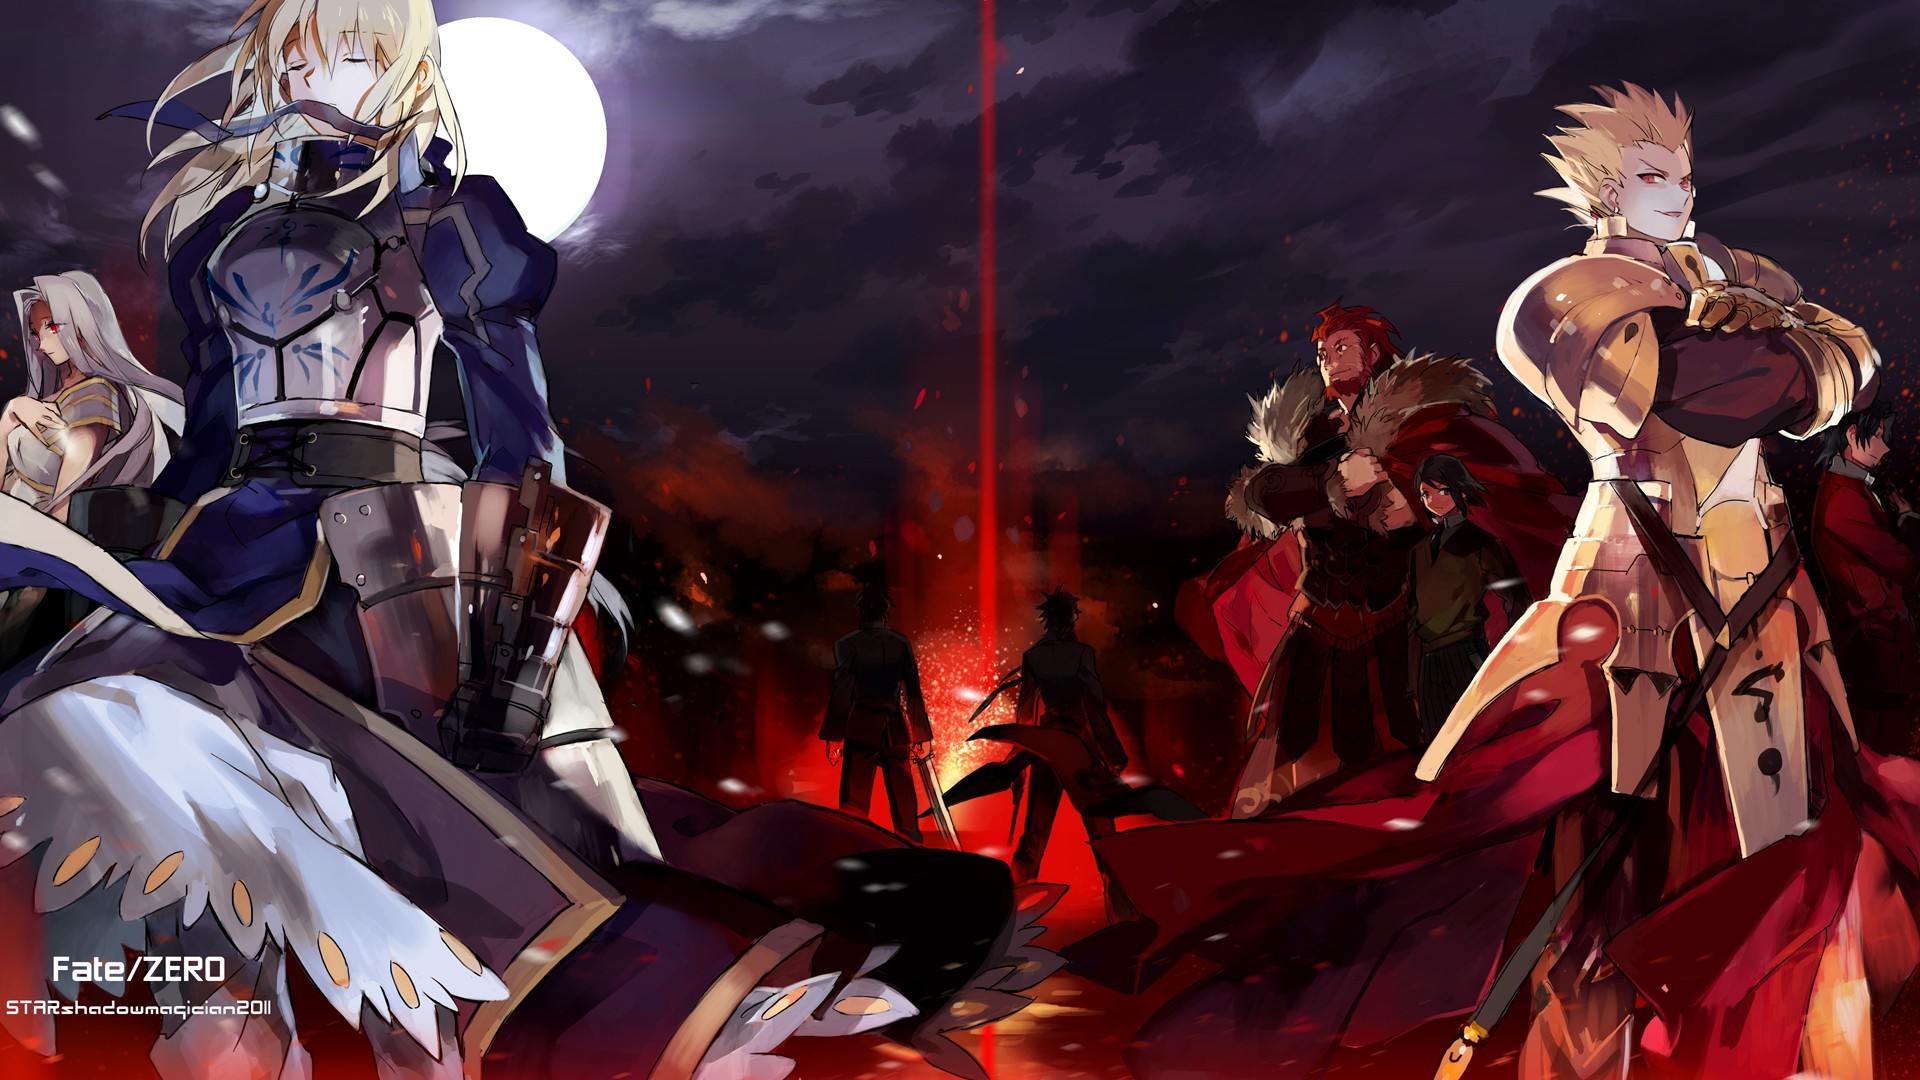 1920x1080 1000+ images about FATE STAY NIGHT on Pinterest | Night, Wallpapers and Dark